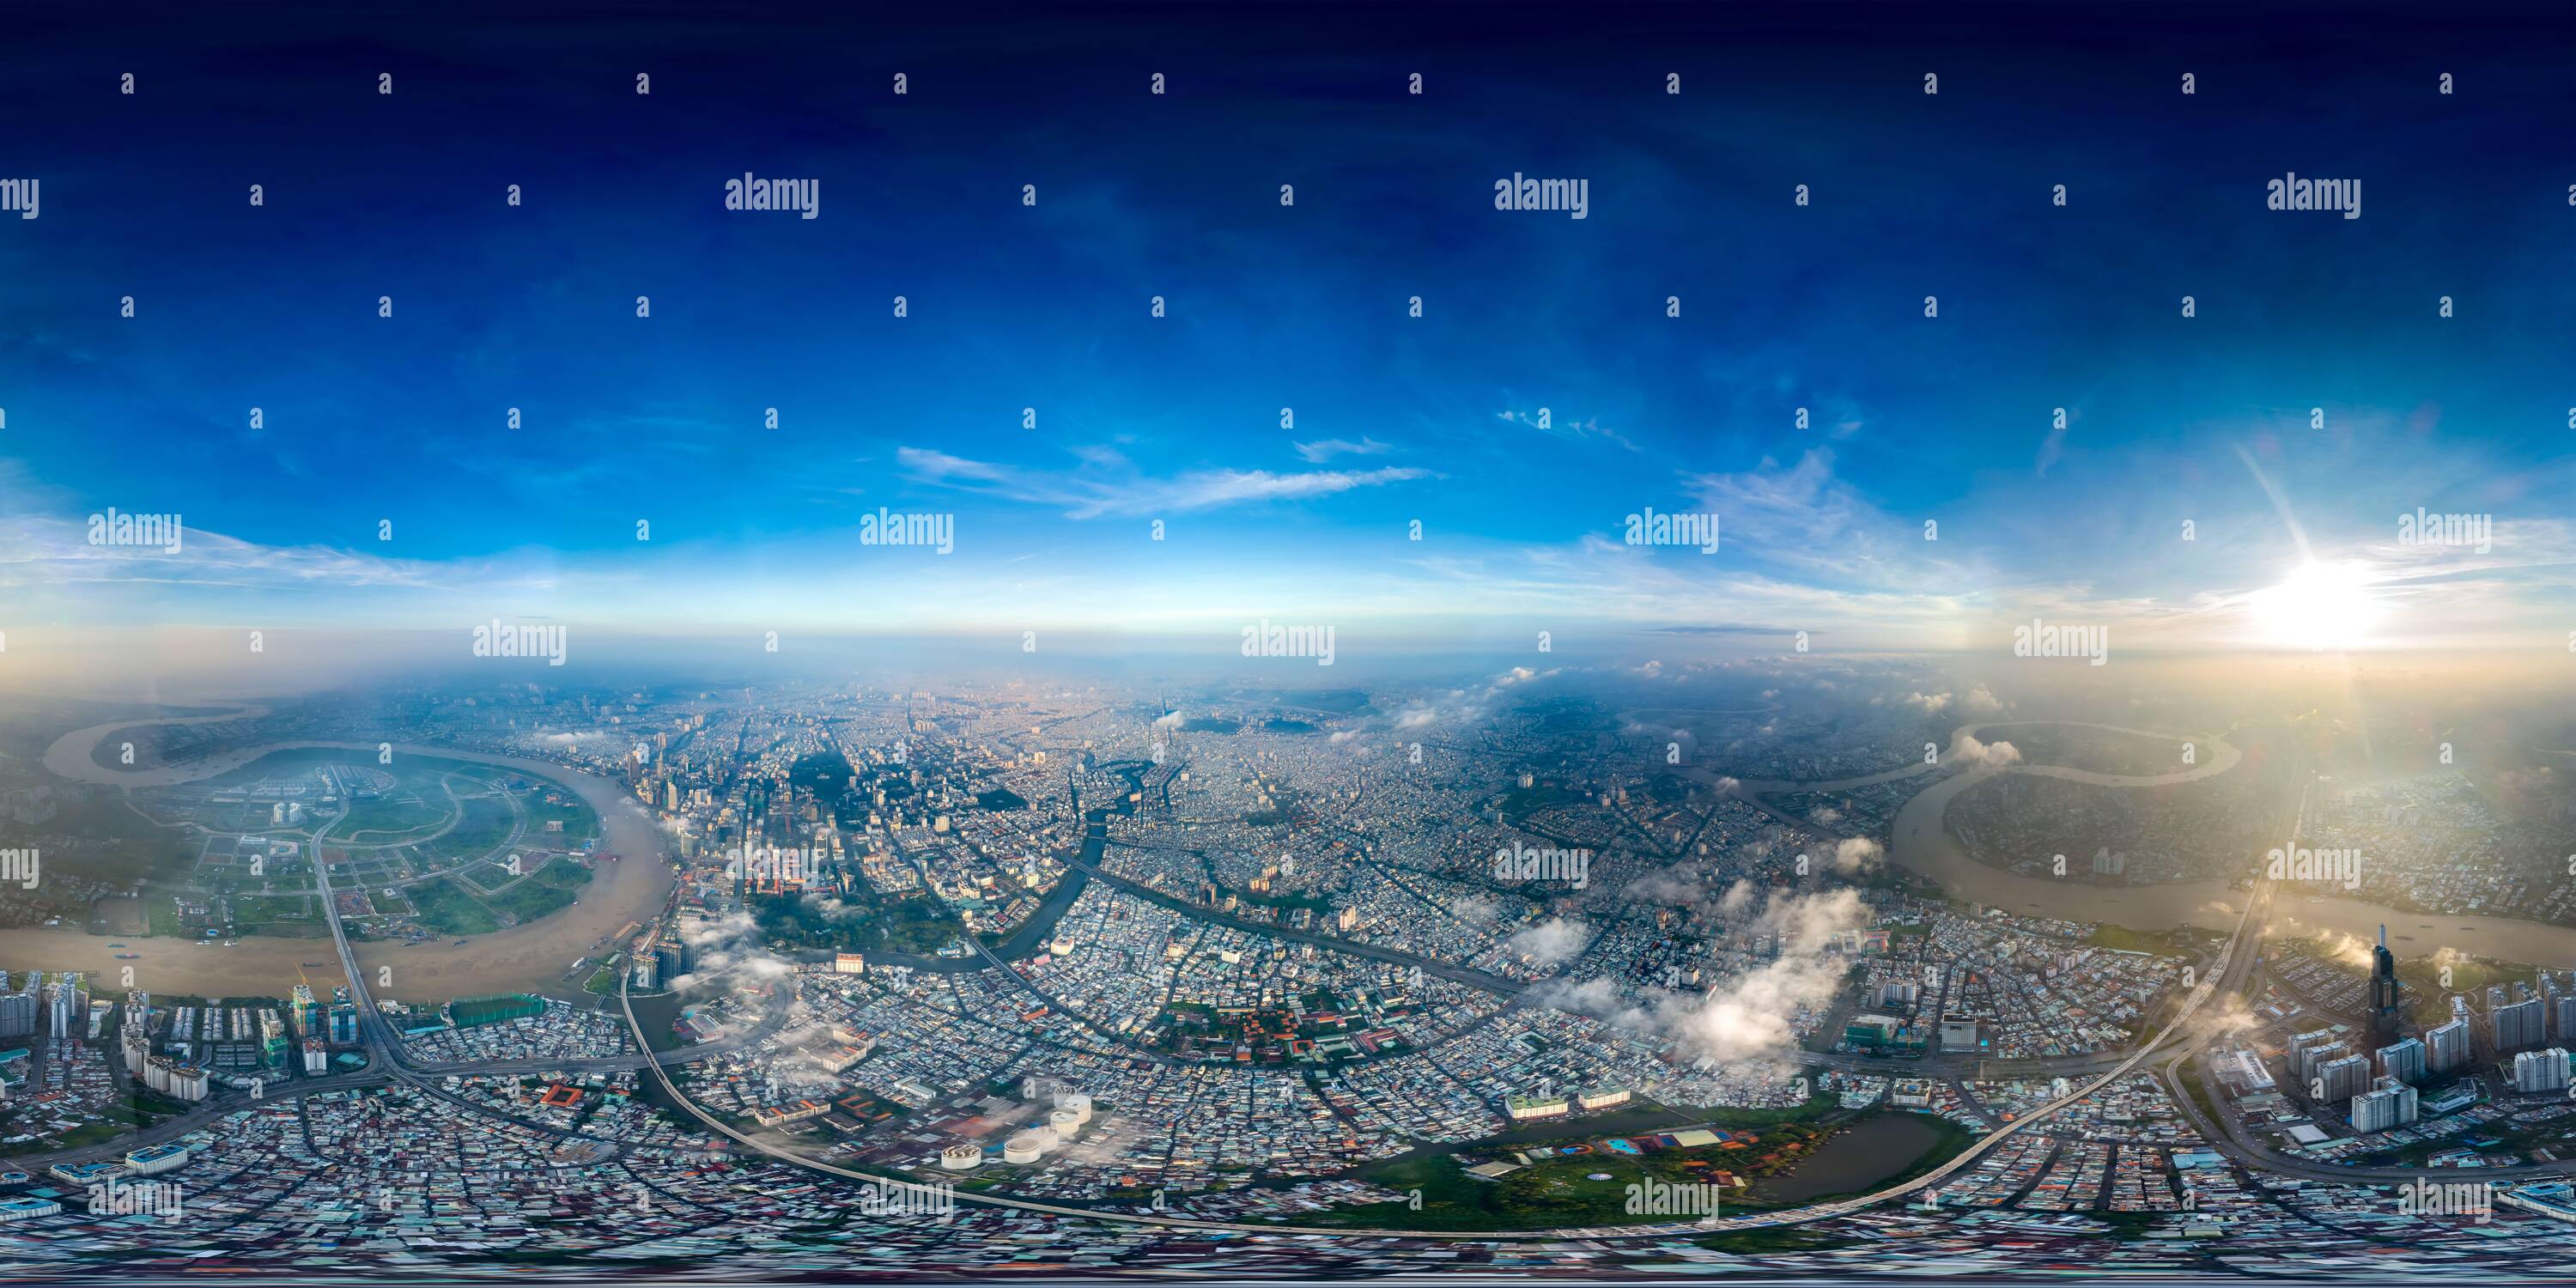 360 degree panoramic view of High Altitude 360 VR Cityscape at Sunrise with Visibility over 10Km.